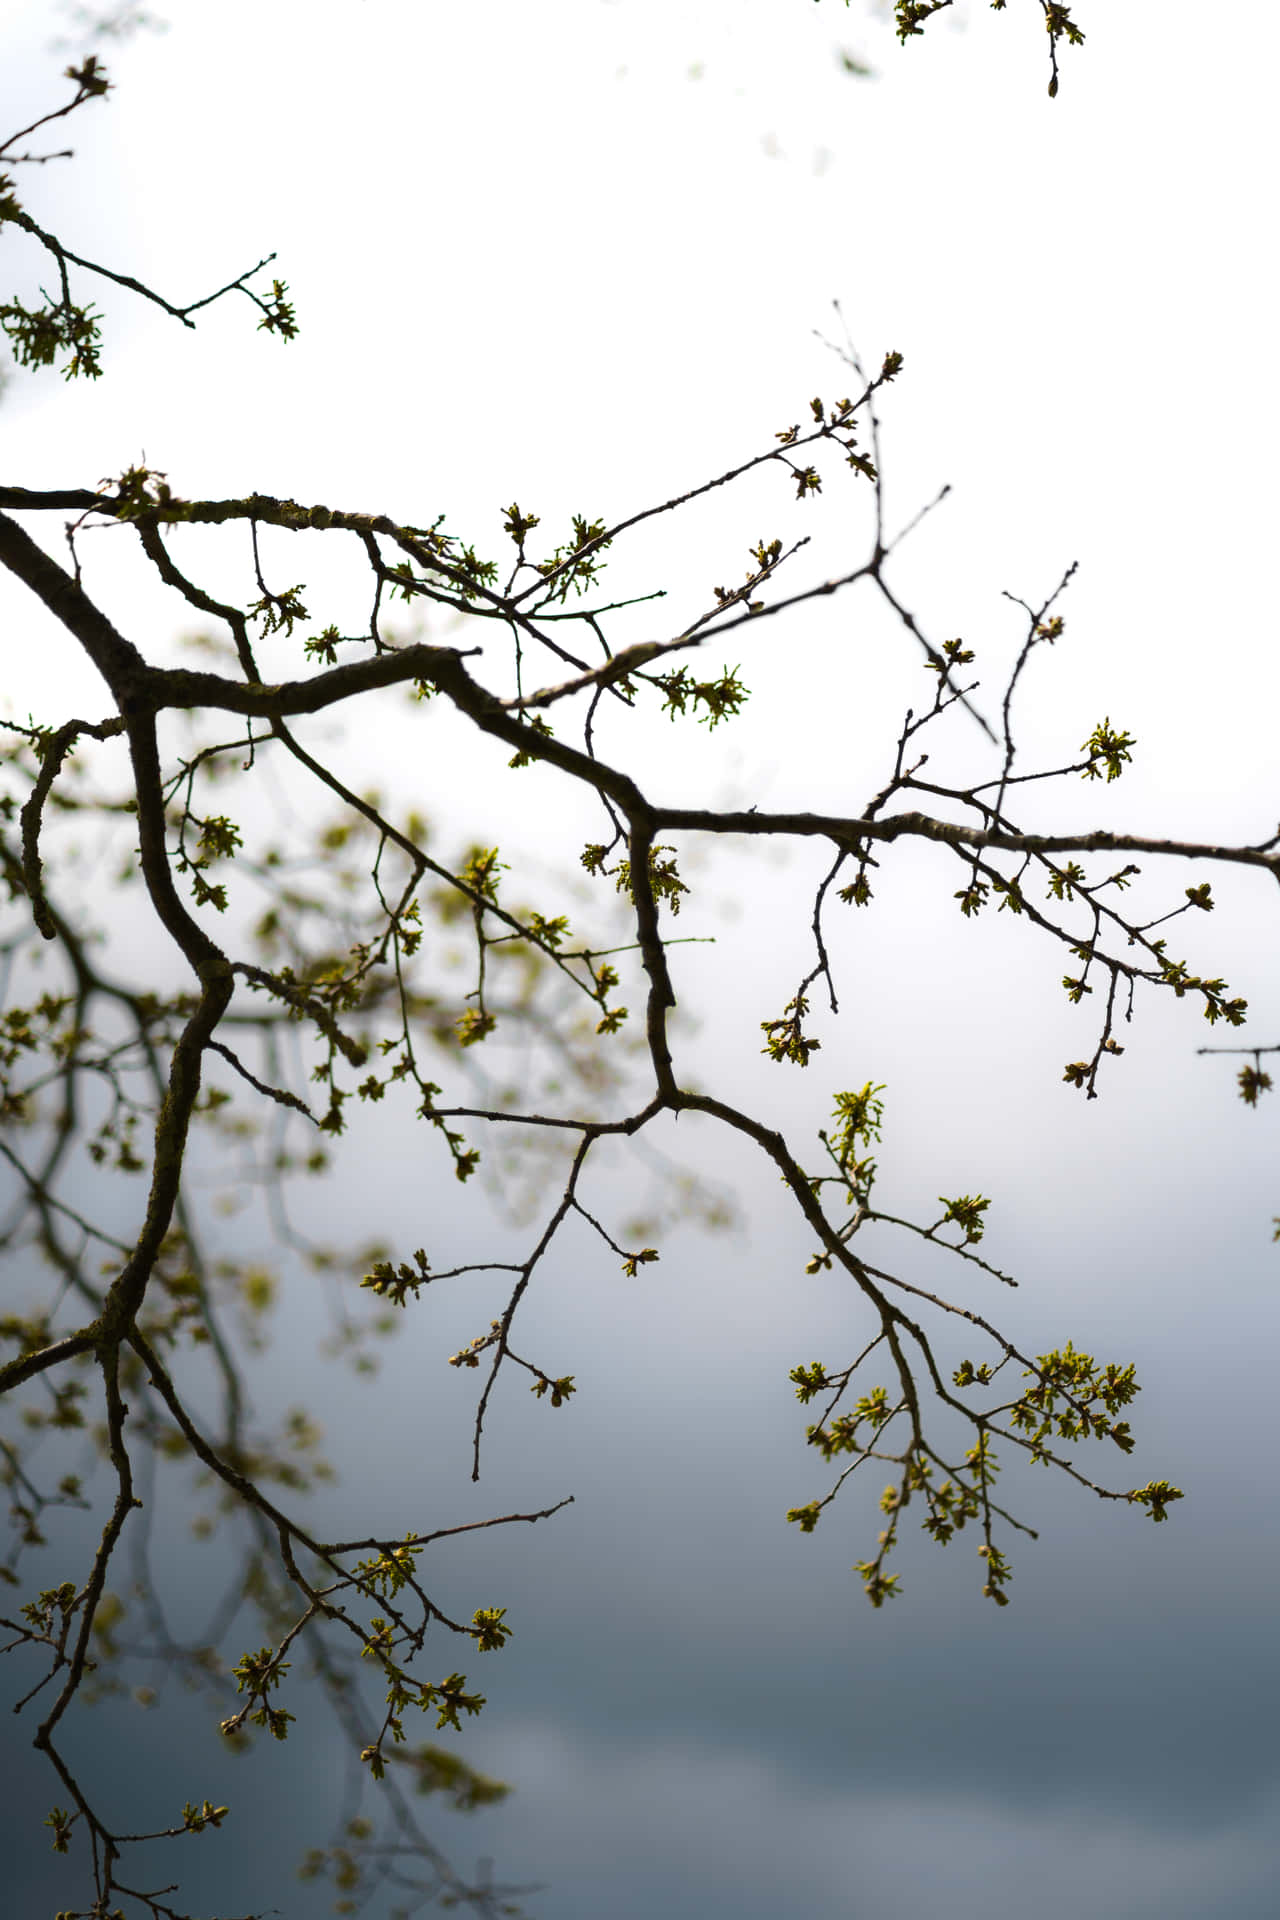 Flower Buds On Tree Branches Wallpaper